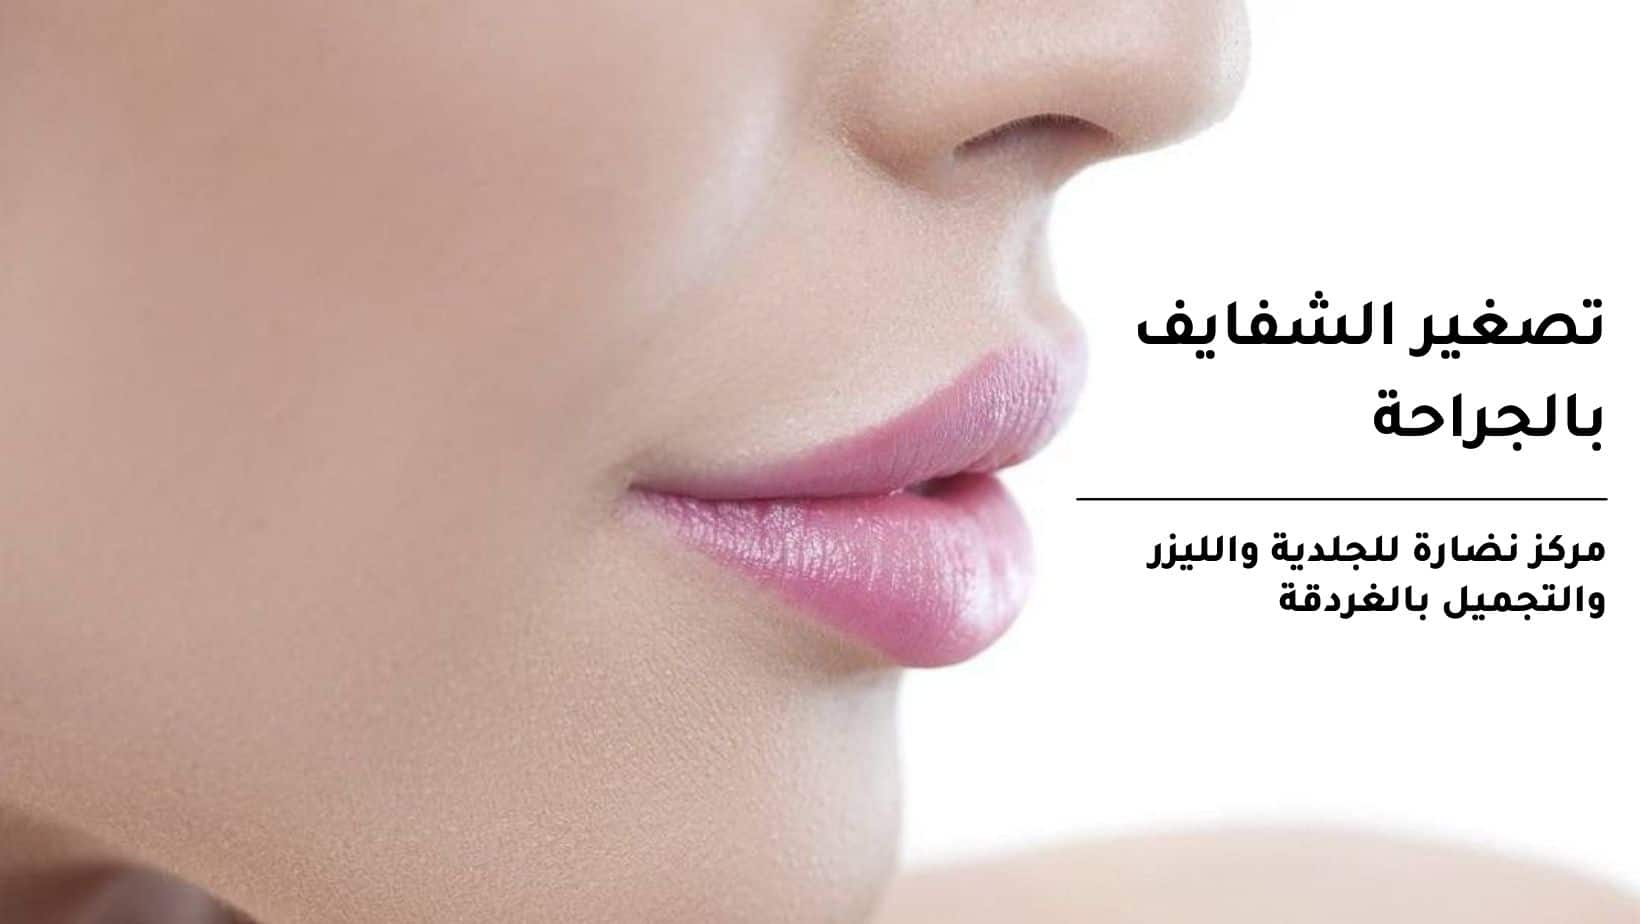 Surgical lip reduction